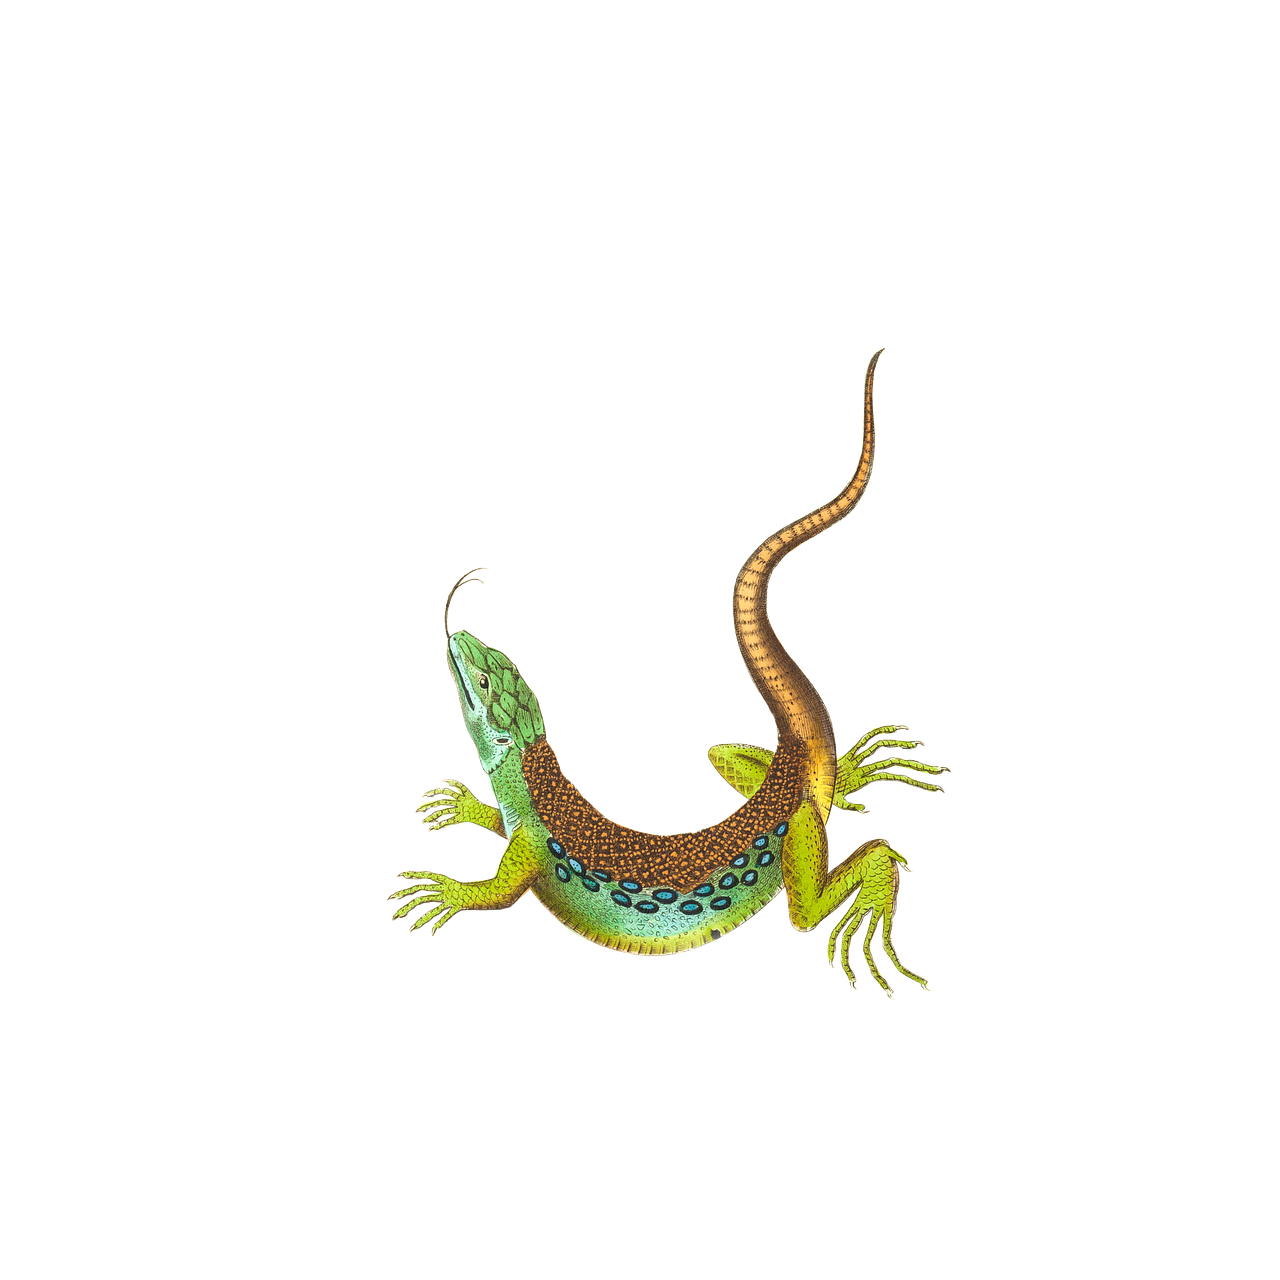 Download PNG image - Reptile PNG Clipart 